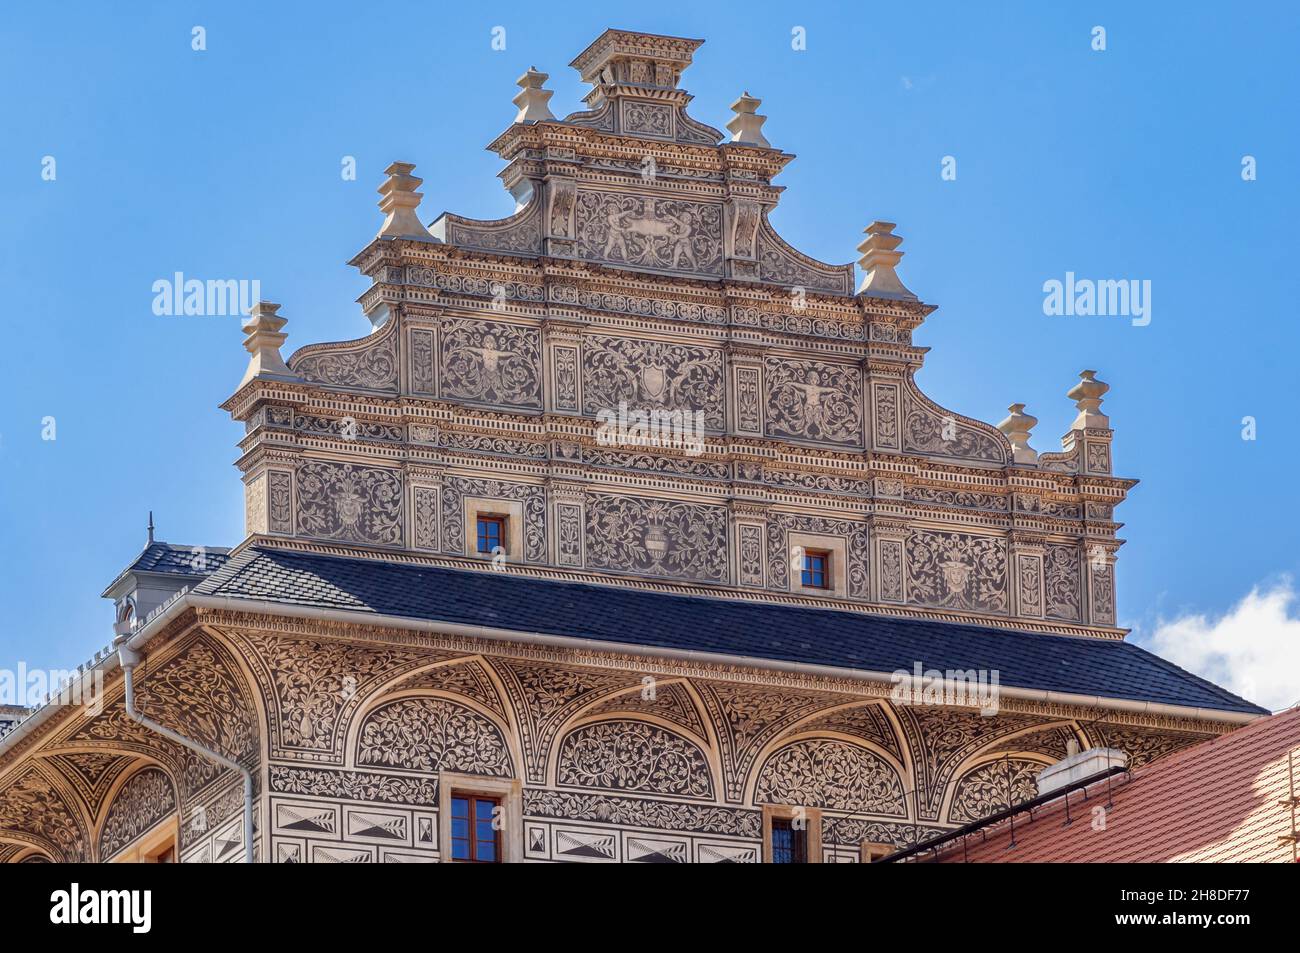 Elaborately decorated sgraffito covers the high gable of the early Renaissance Schwarzenberg Palace, Built in 1567 it is now the National Gallery Stock Photo